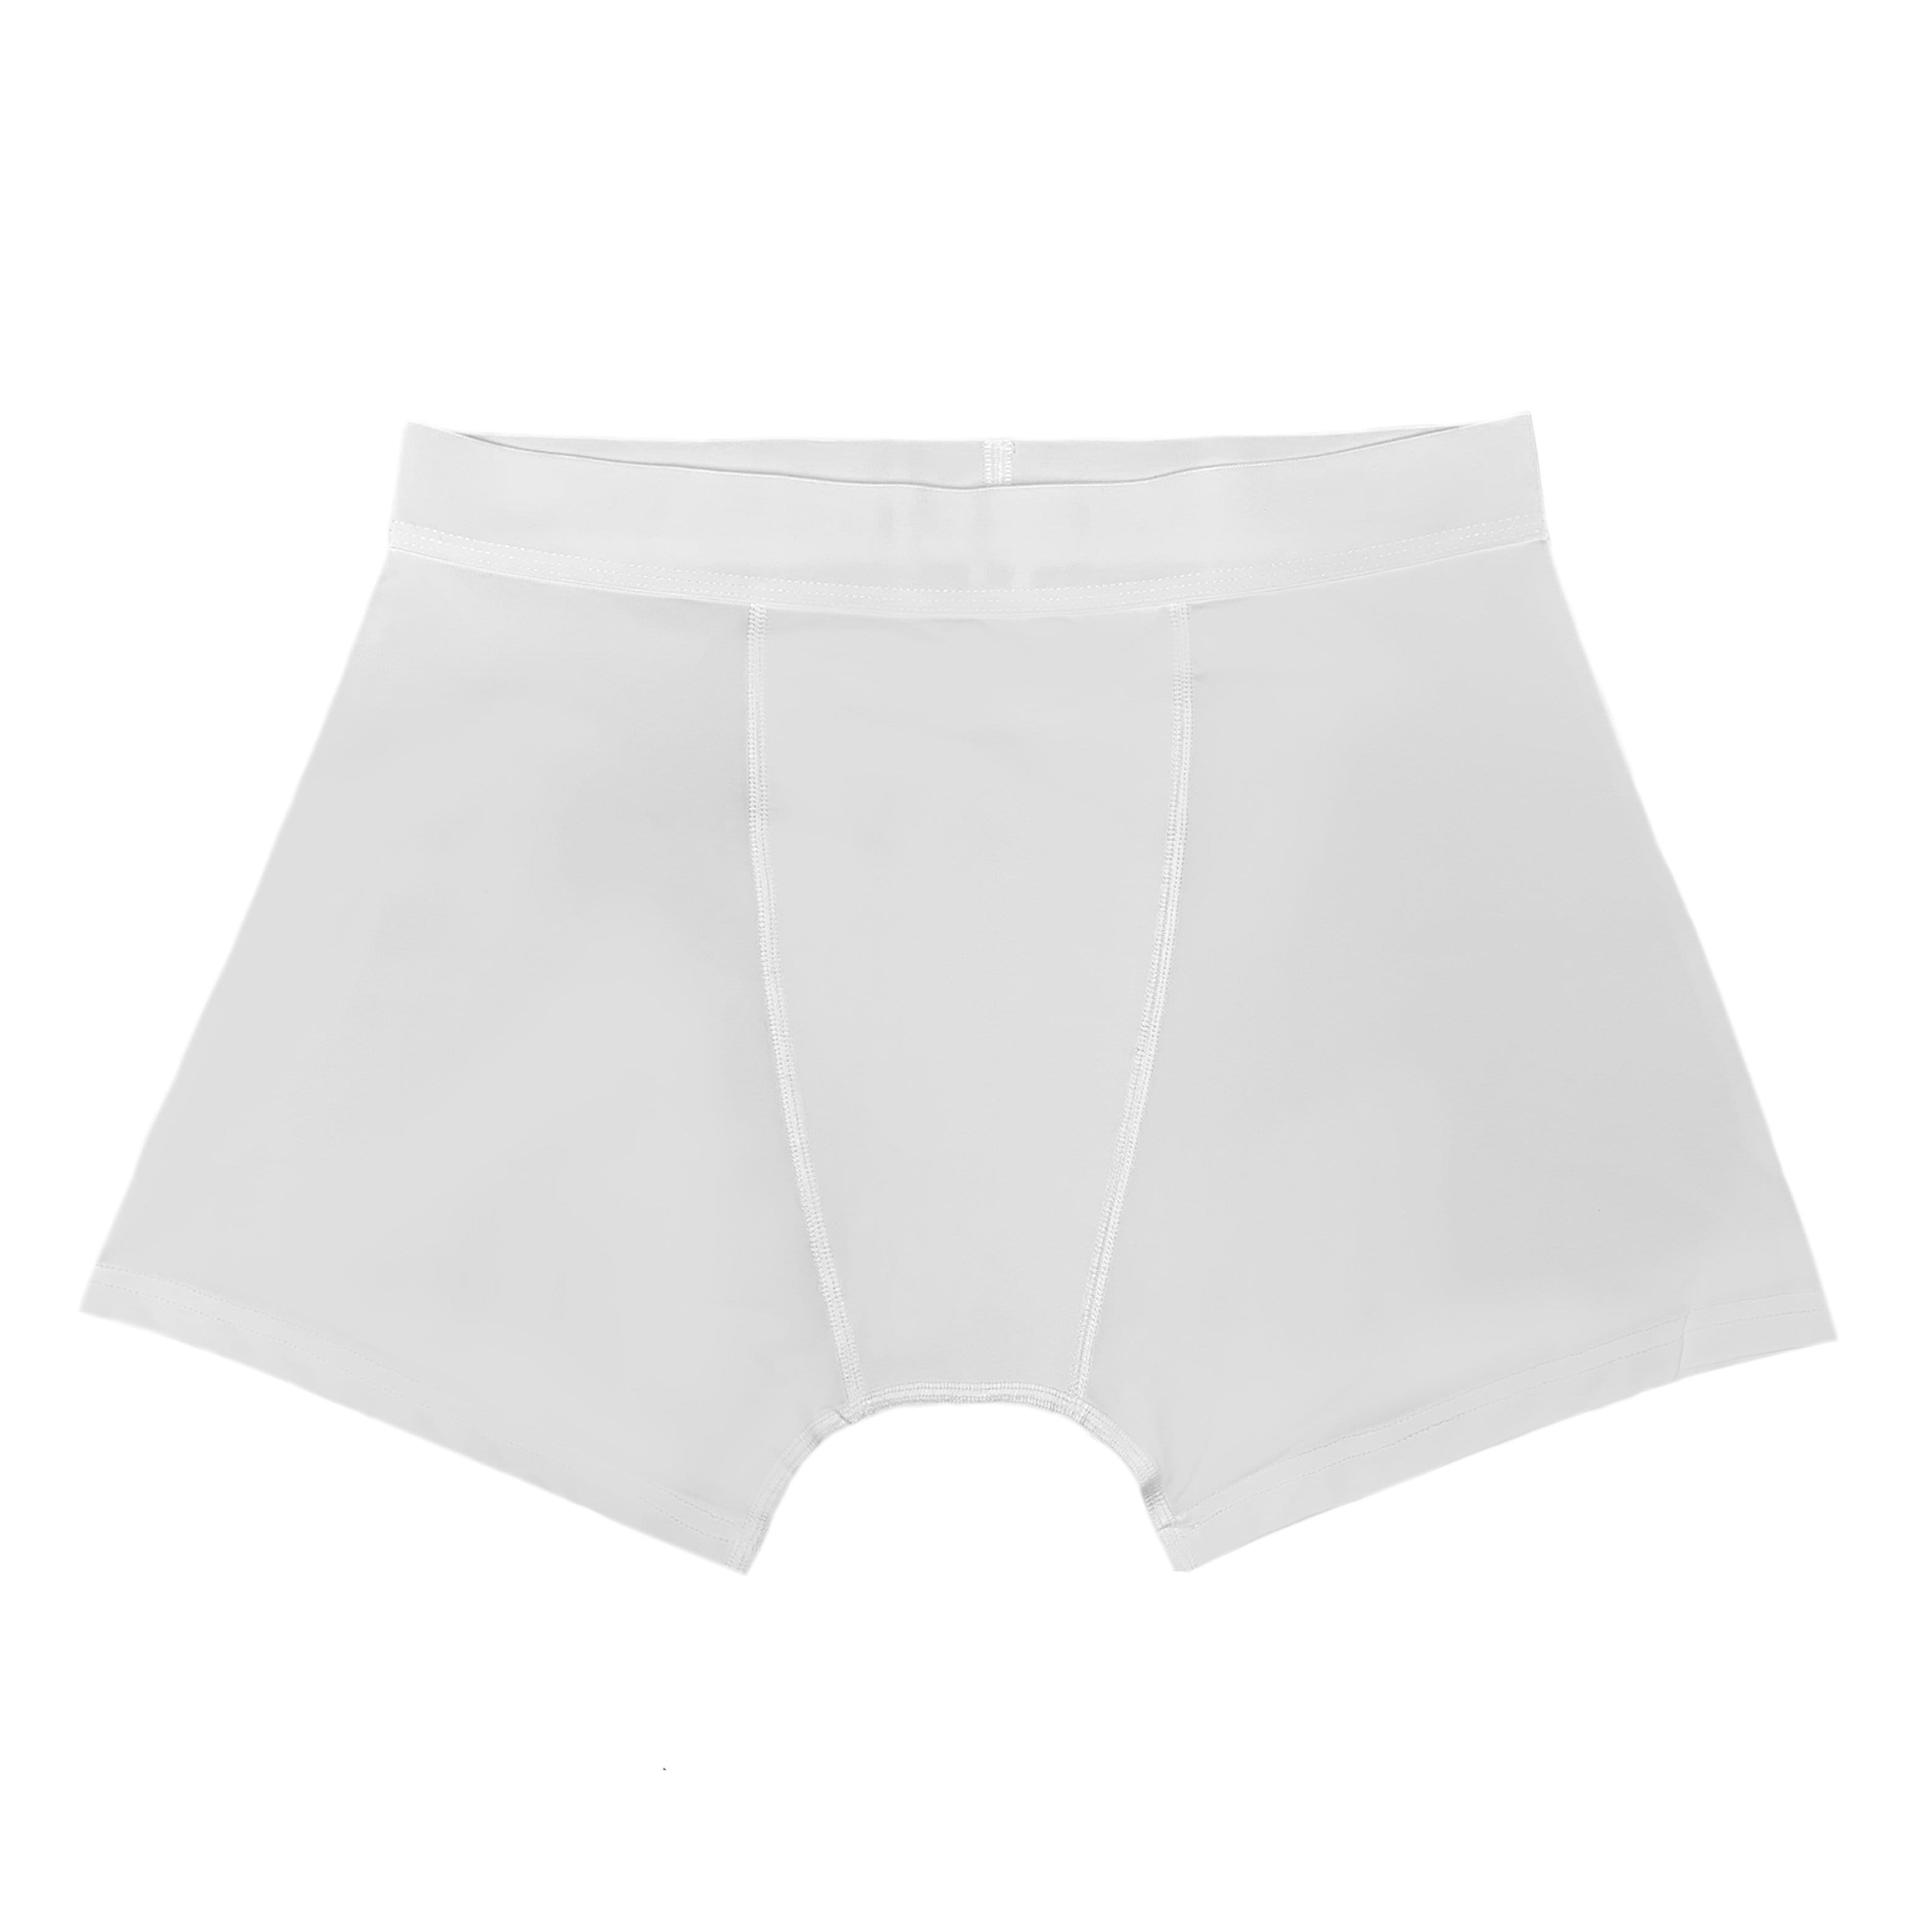 Sublimation Mens Boxer Briefs Heat Transfer White Blank Underpants Polyester  Underwear American Size M L XL XXL Shorts For Home Wear A12 From  Hc_network004, $3.44